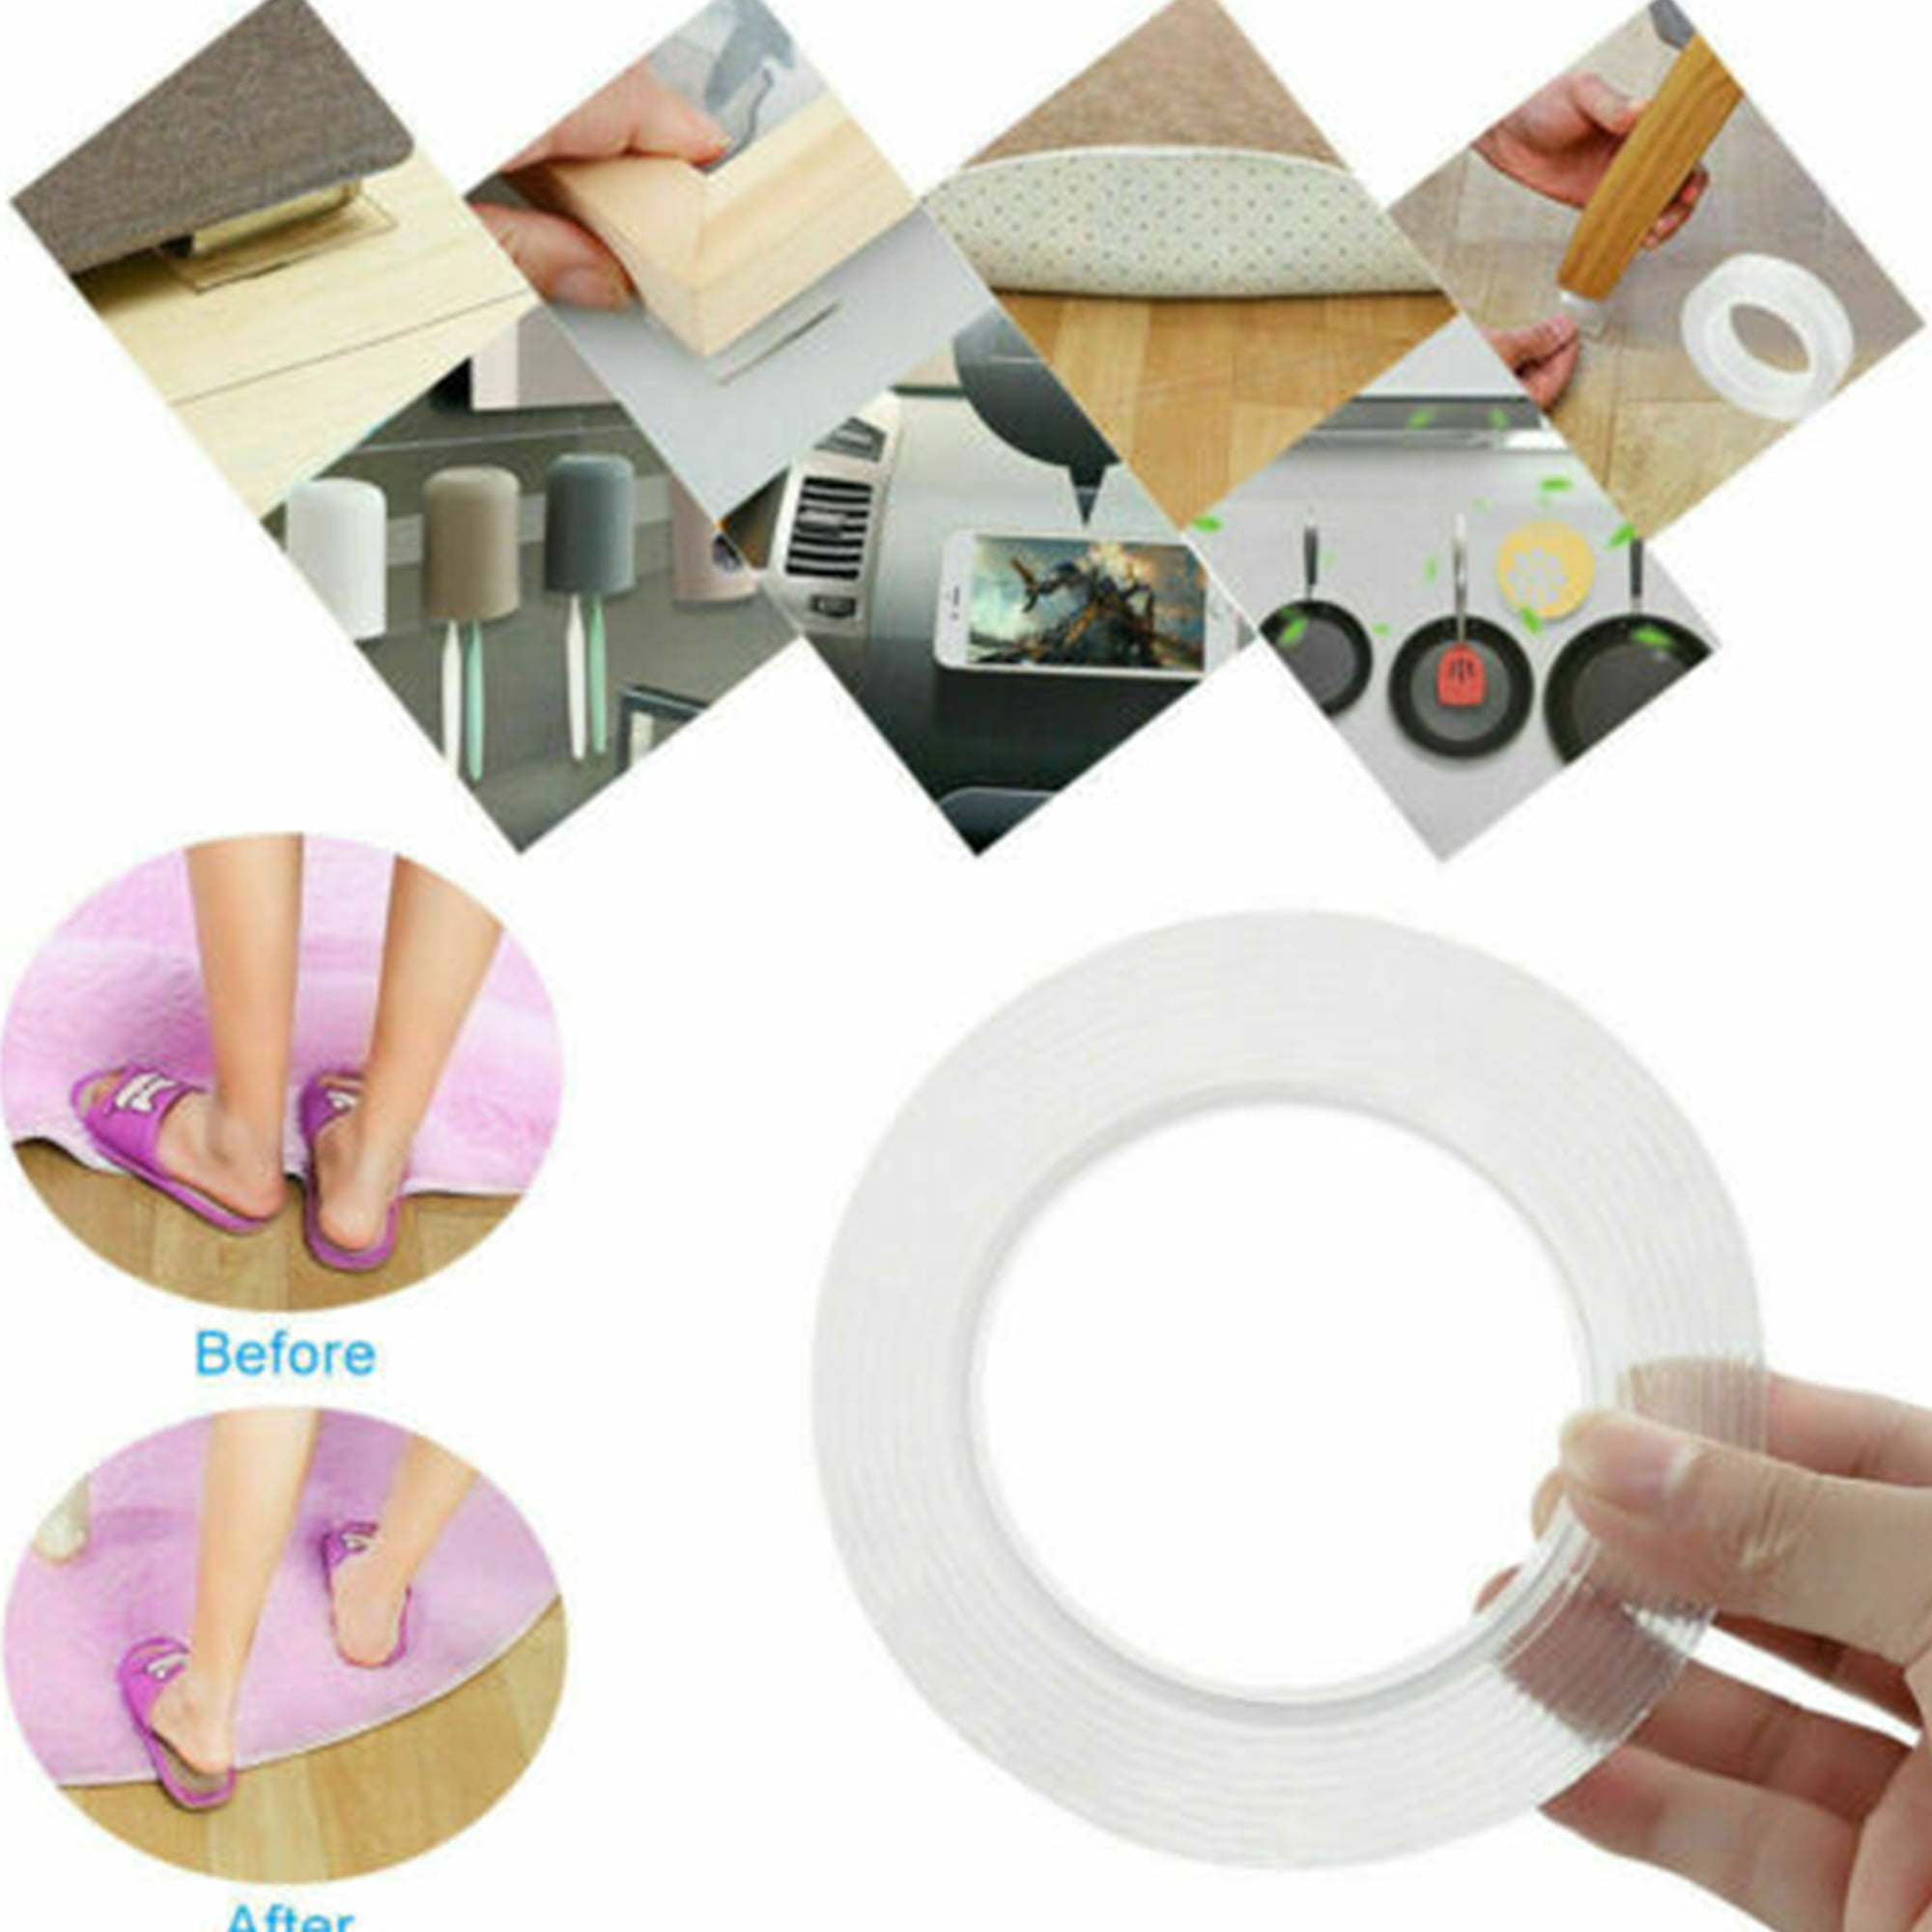 Magic Nano Tape Double Sided Sticky Tape High Viscosity Transparent No  Trace Universal Nano Adhesive Tape For Wall Fixing